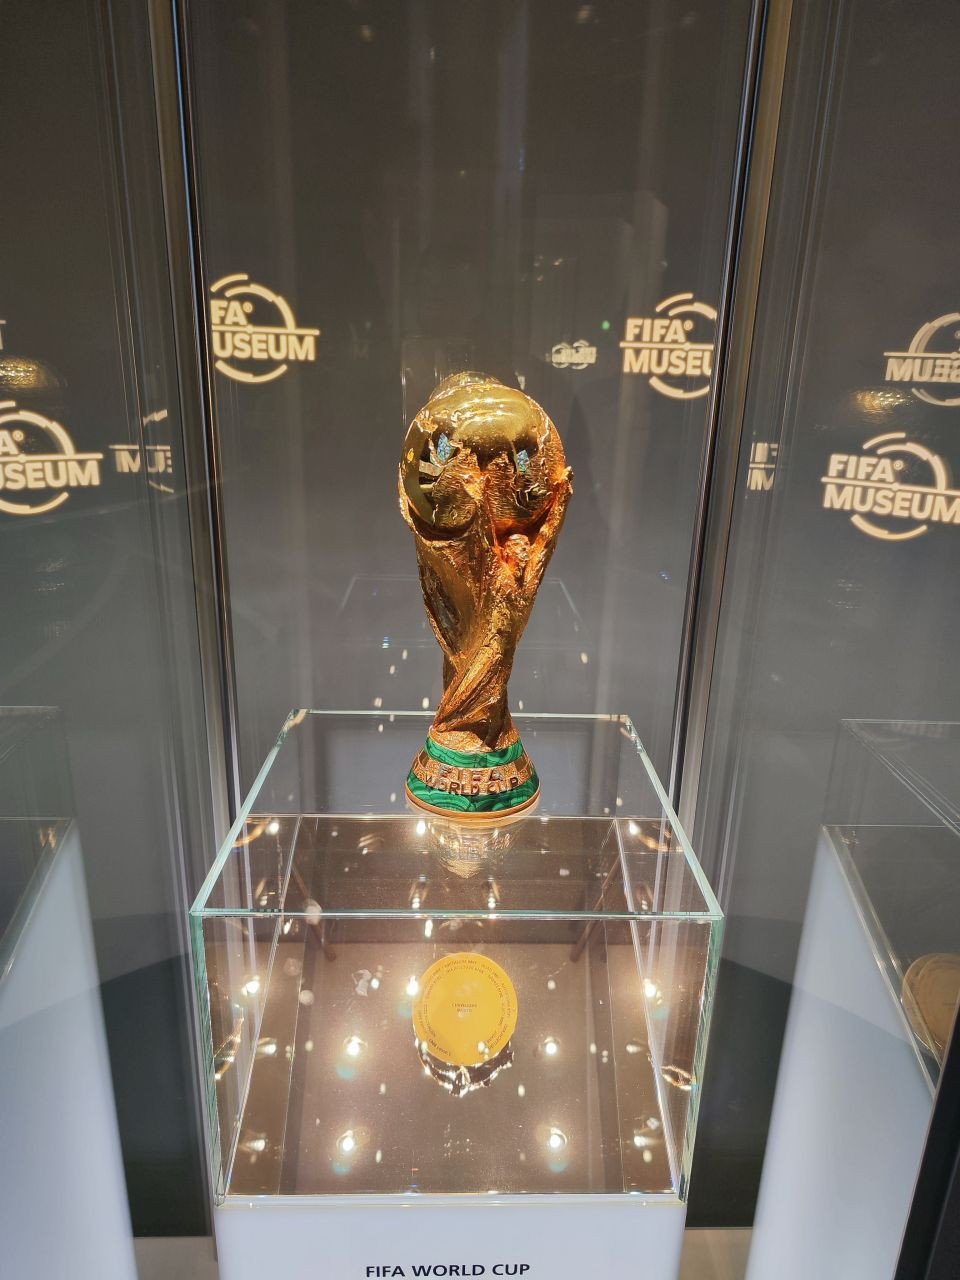 FIFA Museum Zurich, visitor guide